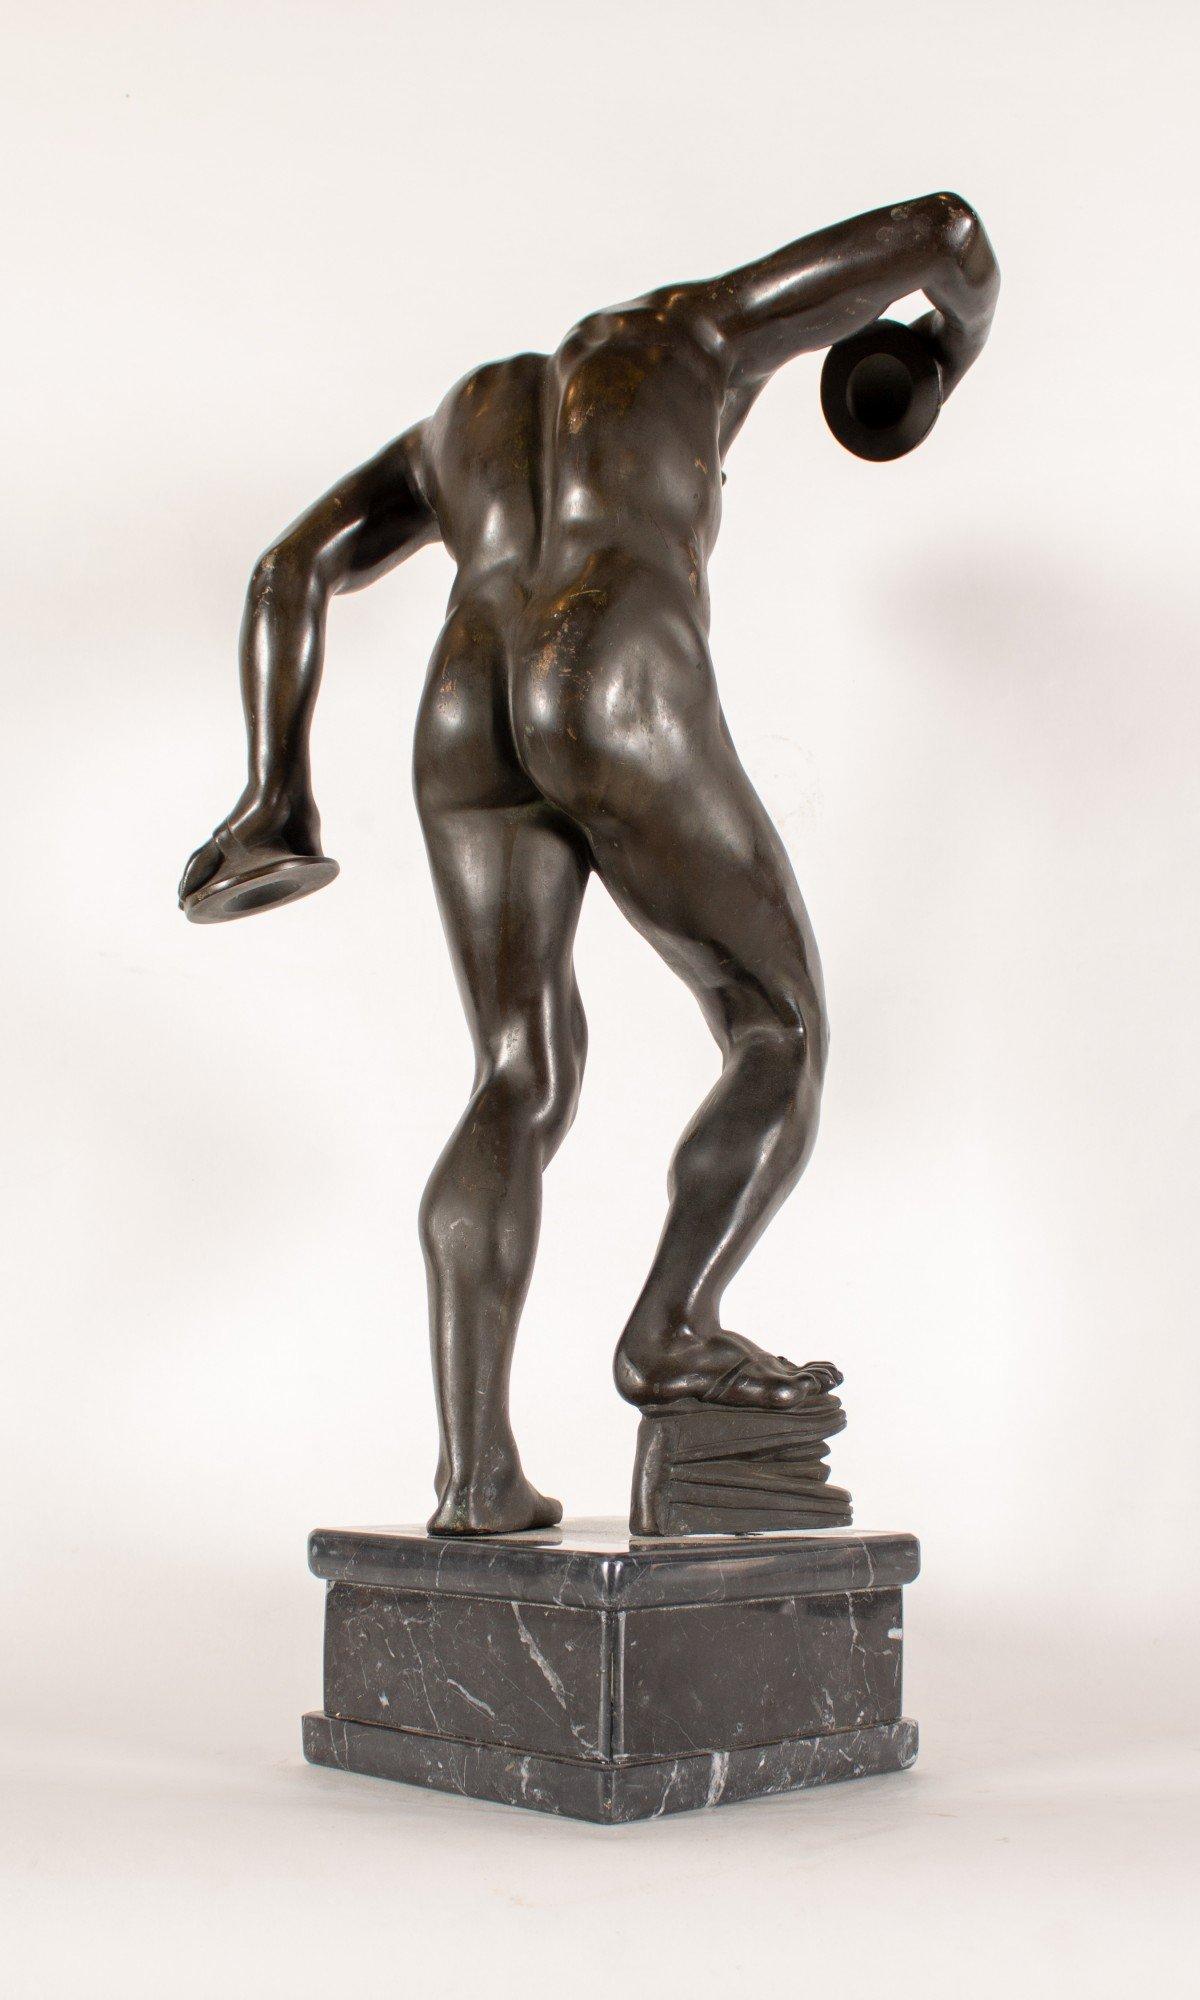 19TH CENTURY CONTINENTAL SCHOOL
Satyr with Cymbals and Kroupezion, Grand Tour after the Antique
Bronze with marble base
26 in. h. x 15 in. w. x 10 in. d.

This dancing faun is now more precisely identified as a satyr. Satyrs are roguish figures from